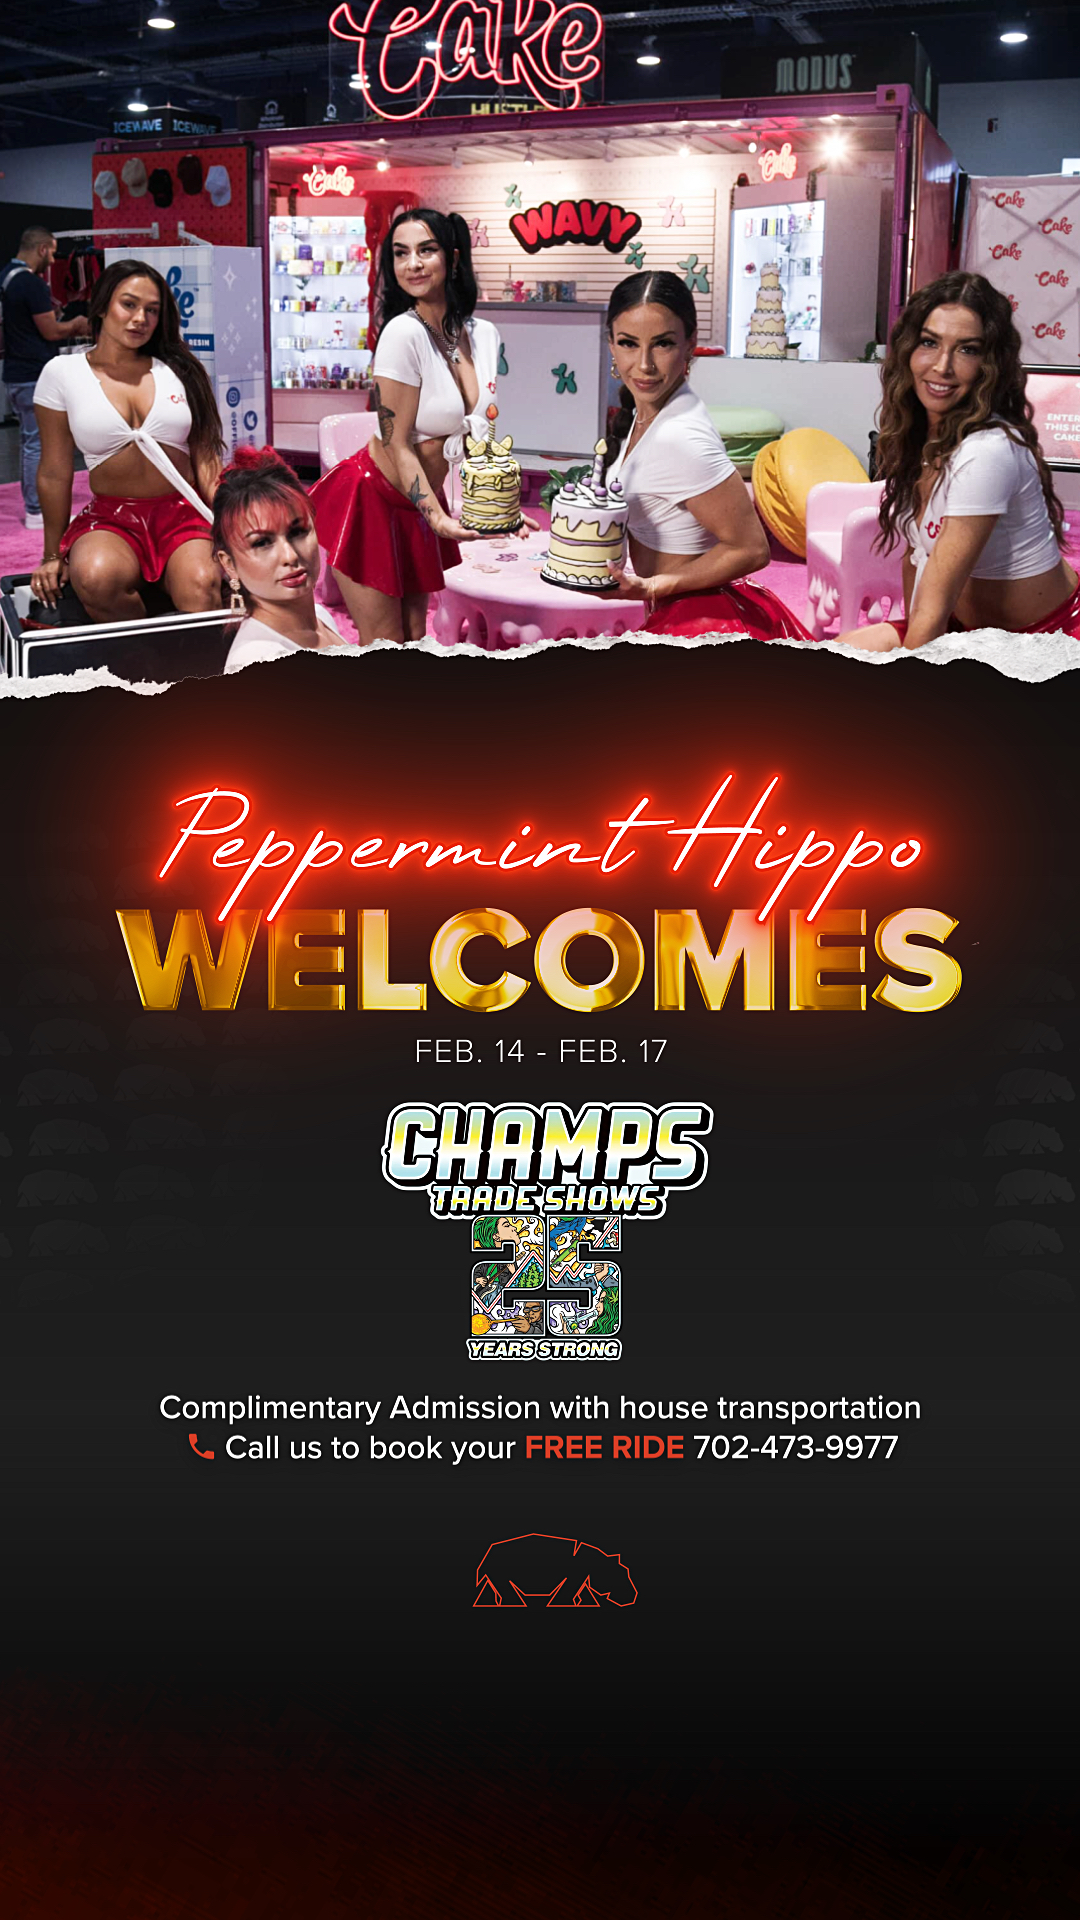 HIPPO WELCOME CHAMPS